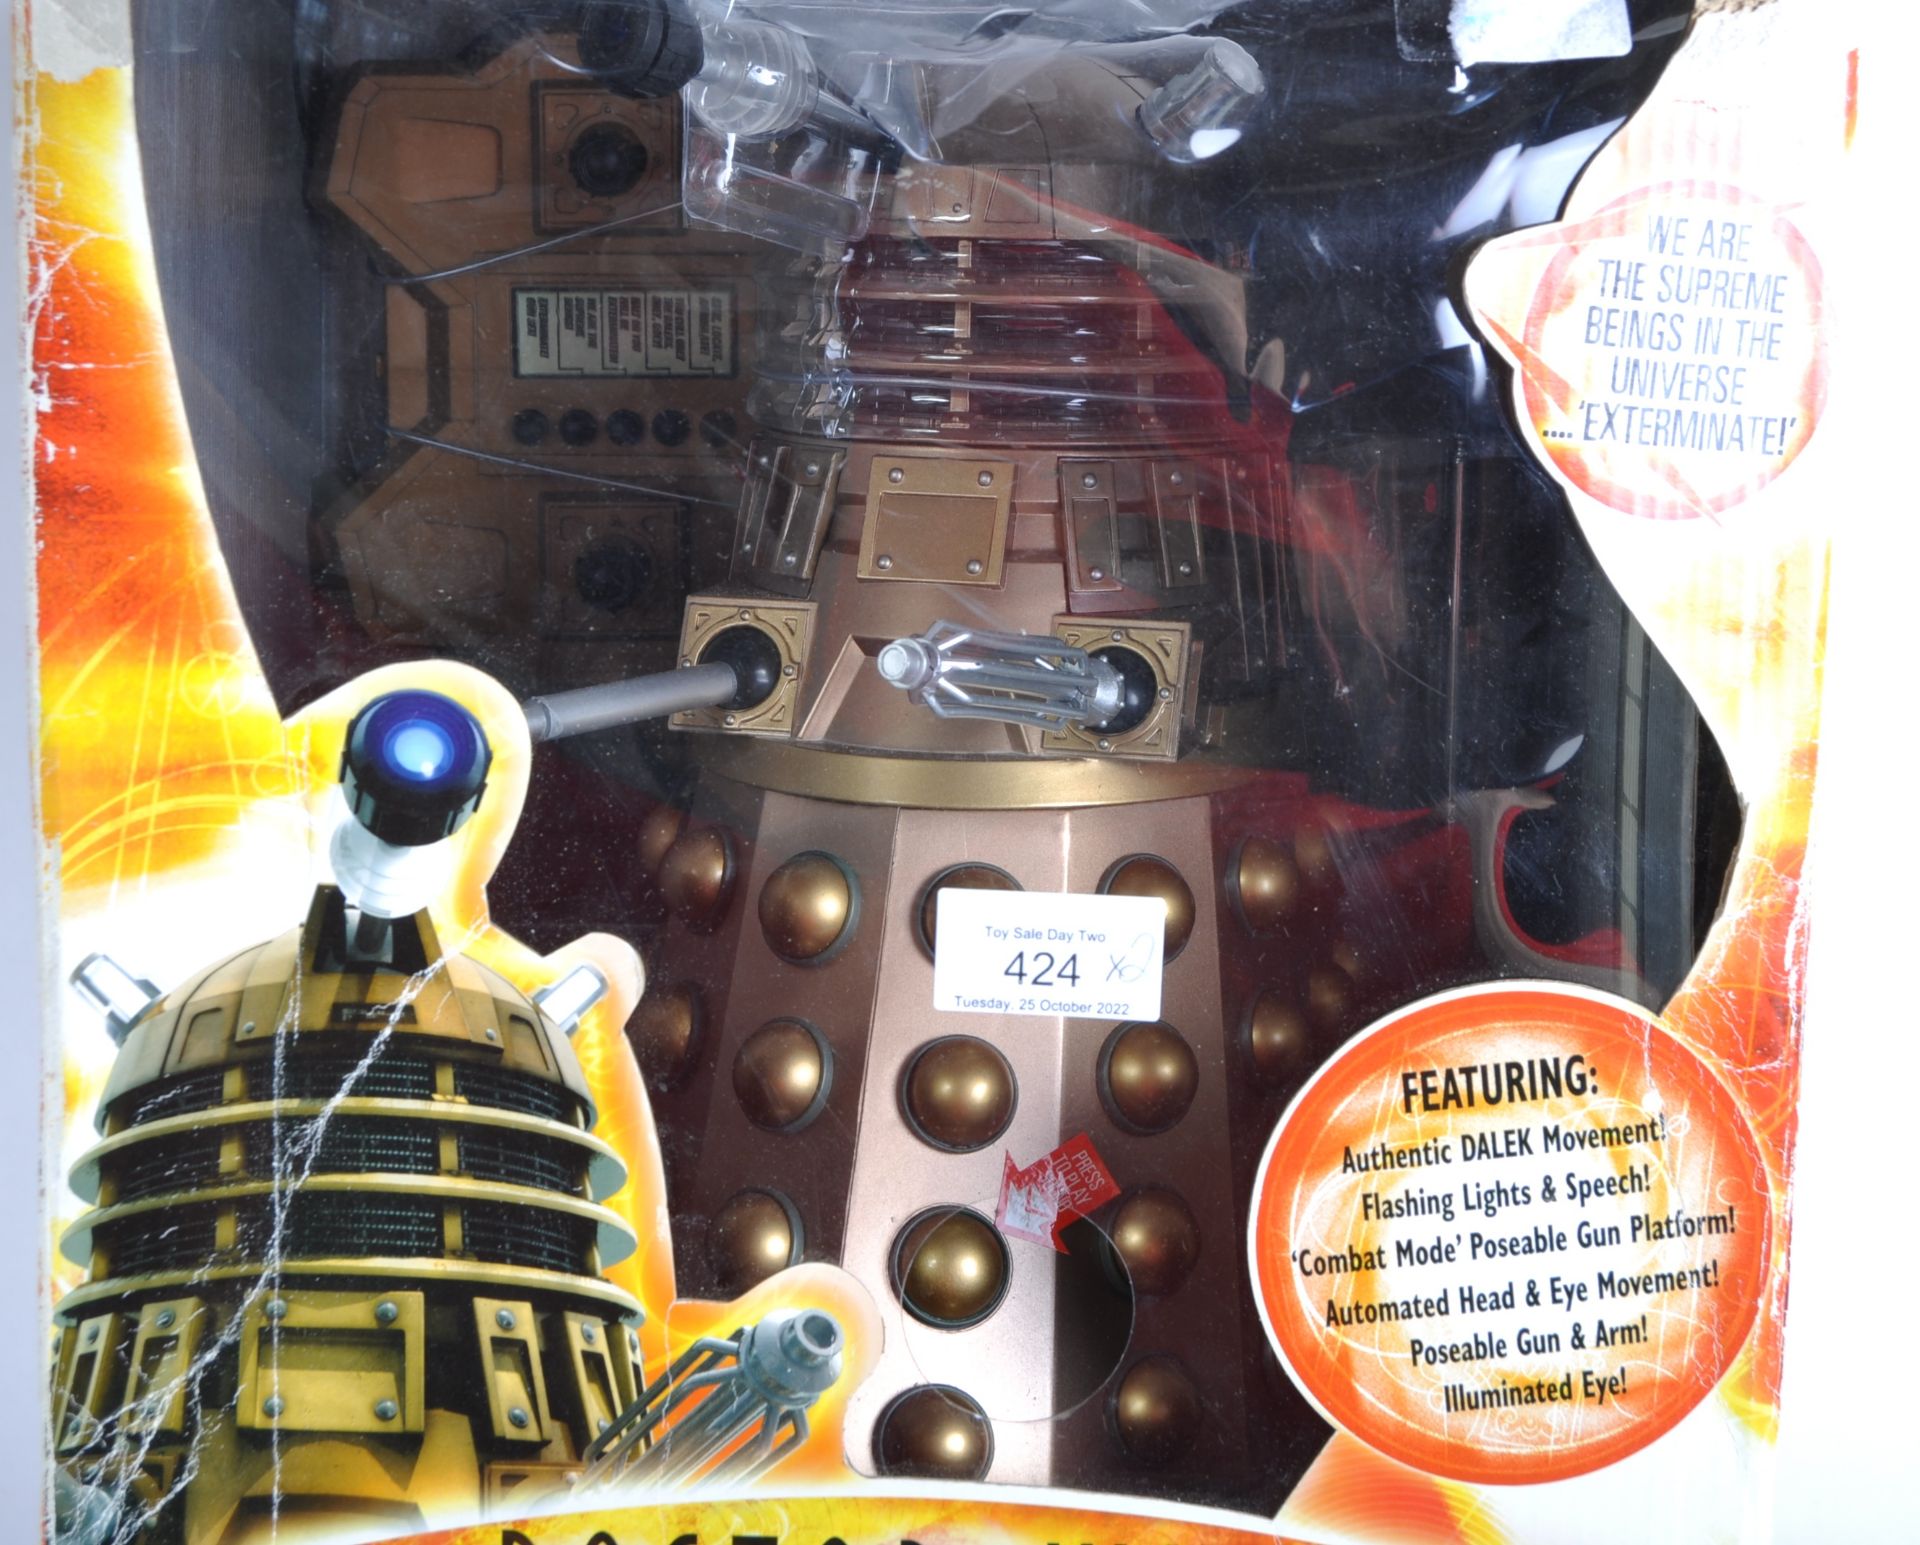 DOCTOR WHO - CHARACTER - LARGE SCALE RADIO CONTROLLED DALEKS - Image 2 of 4